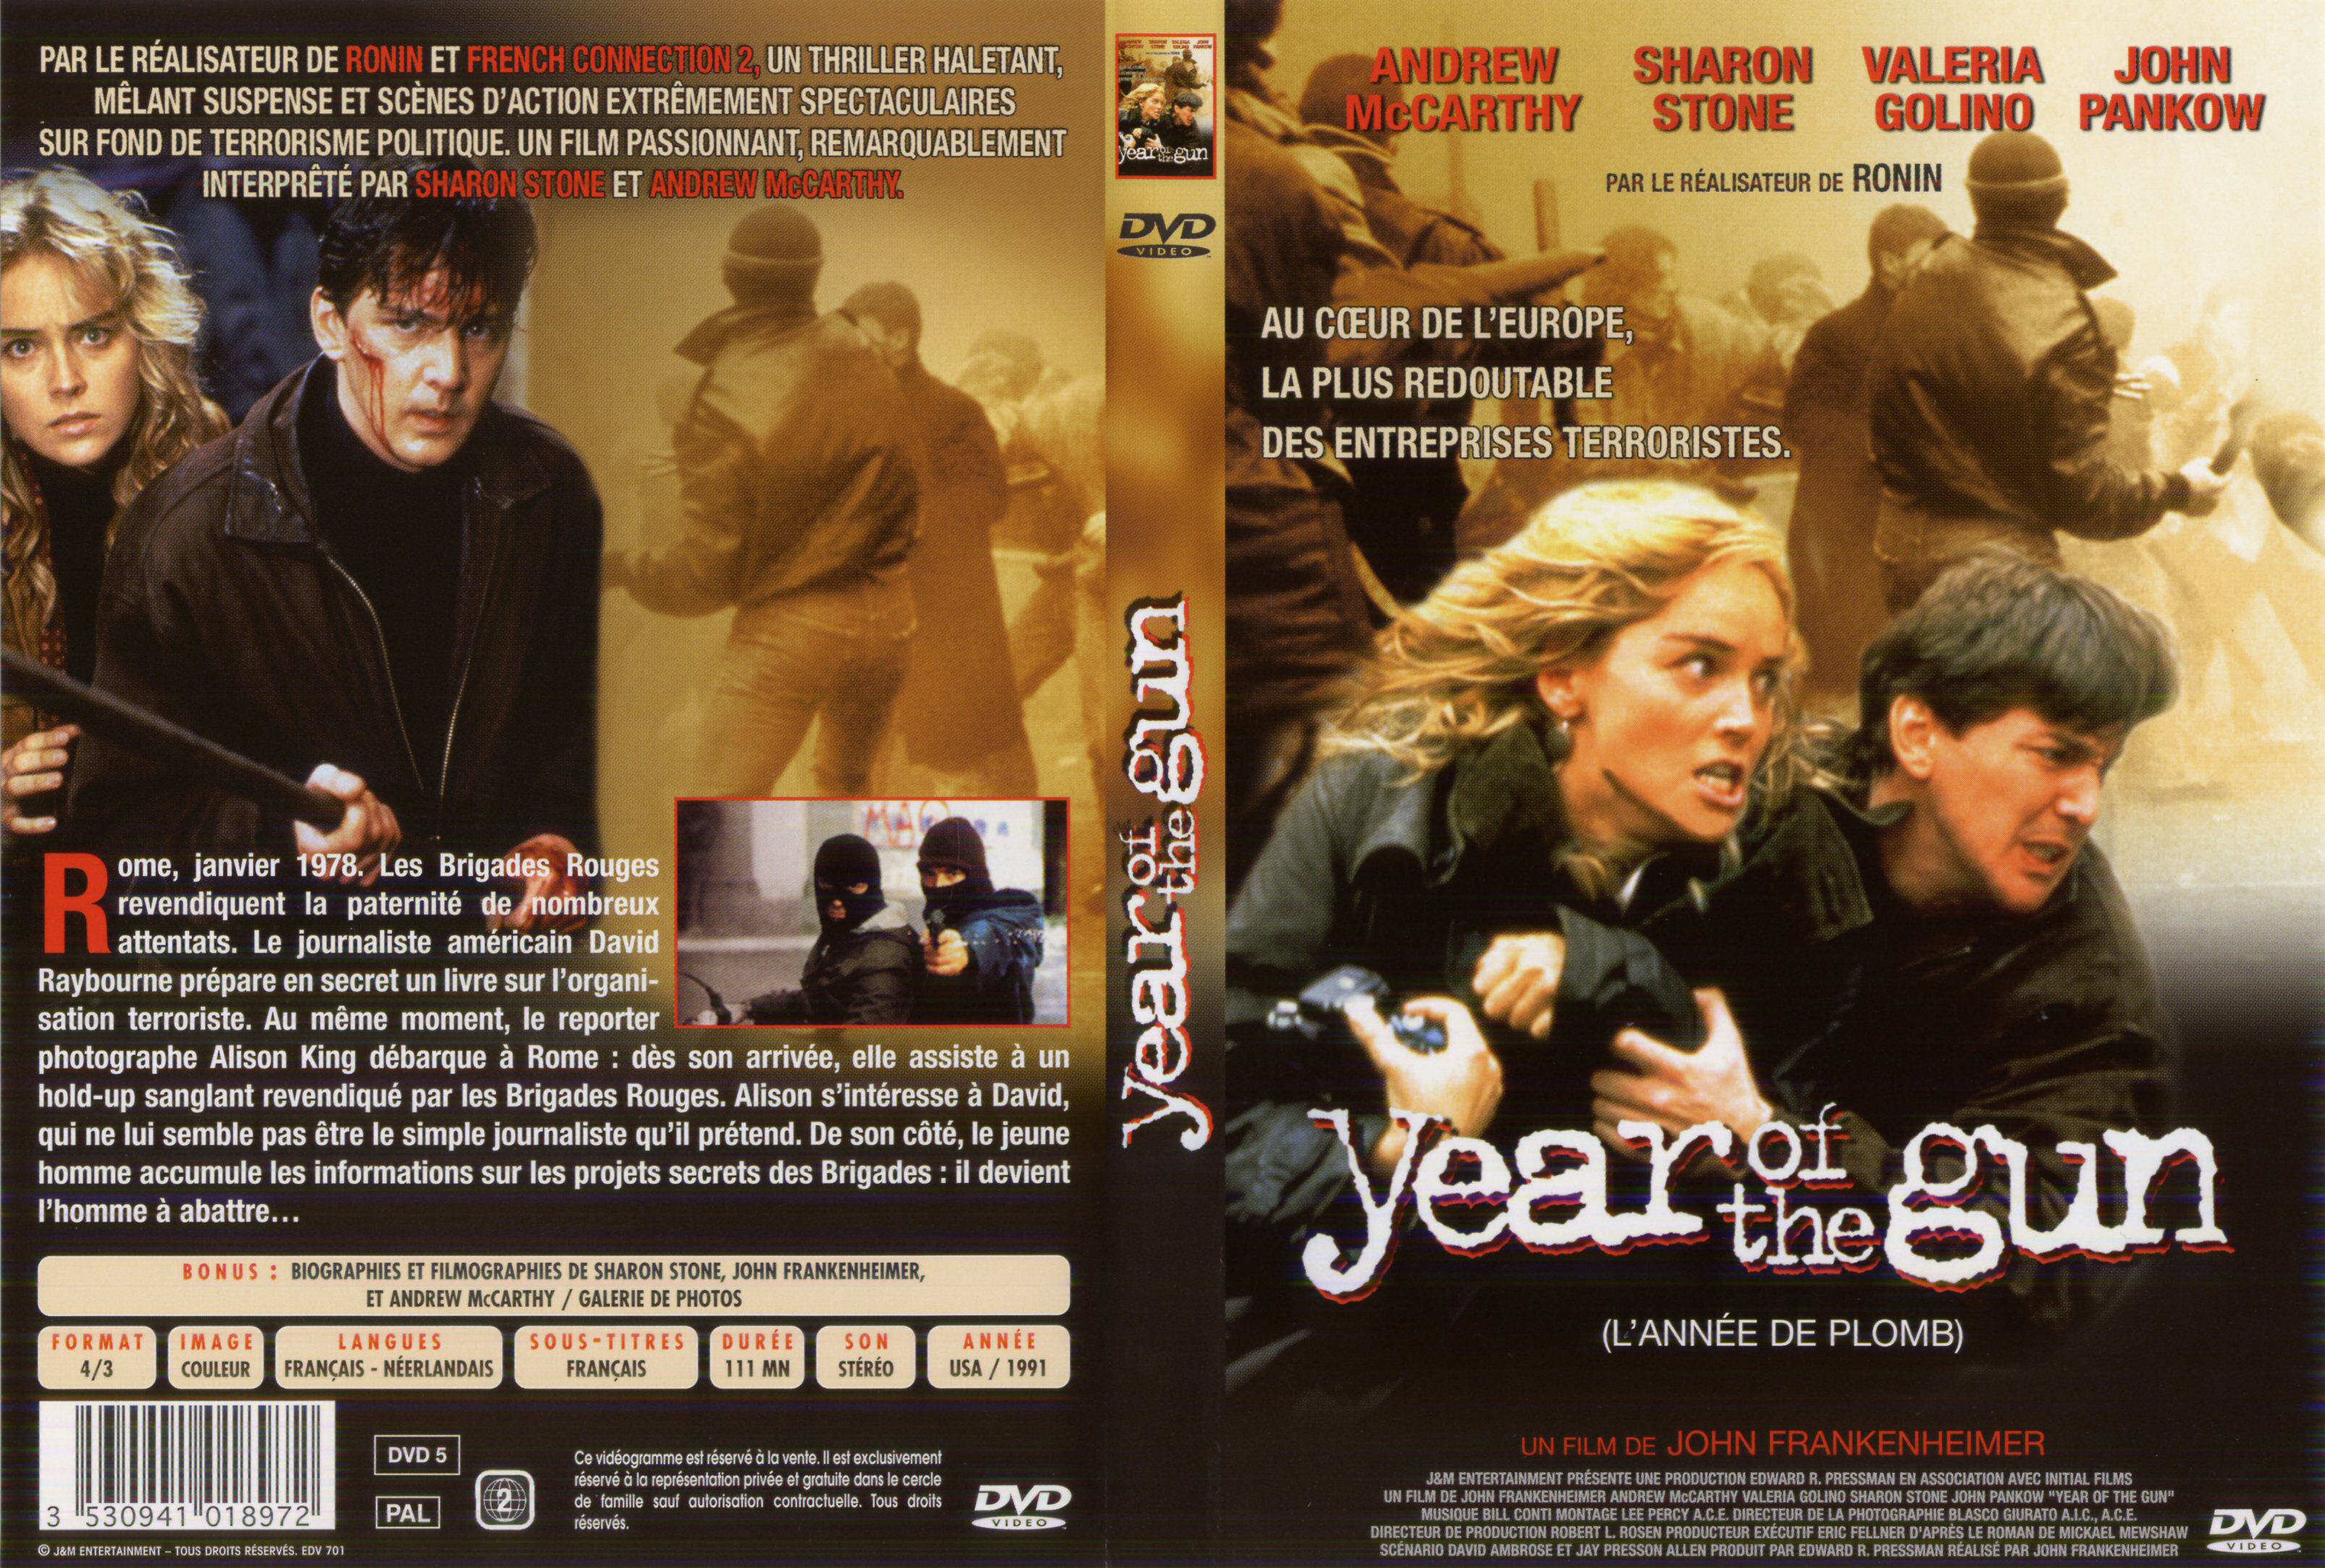 Jaquette DVD Year of the gun v2